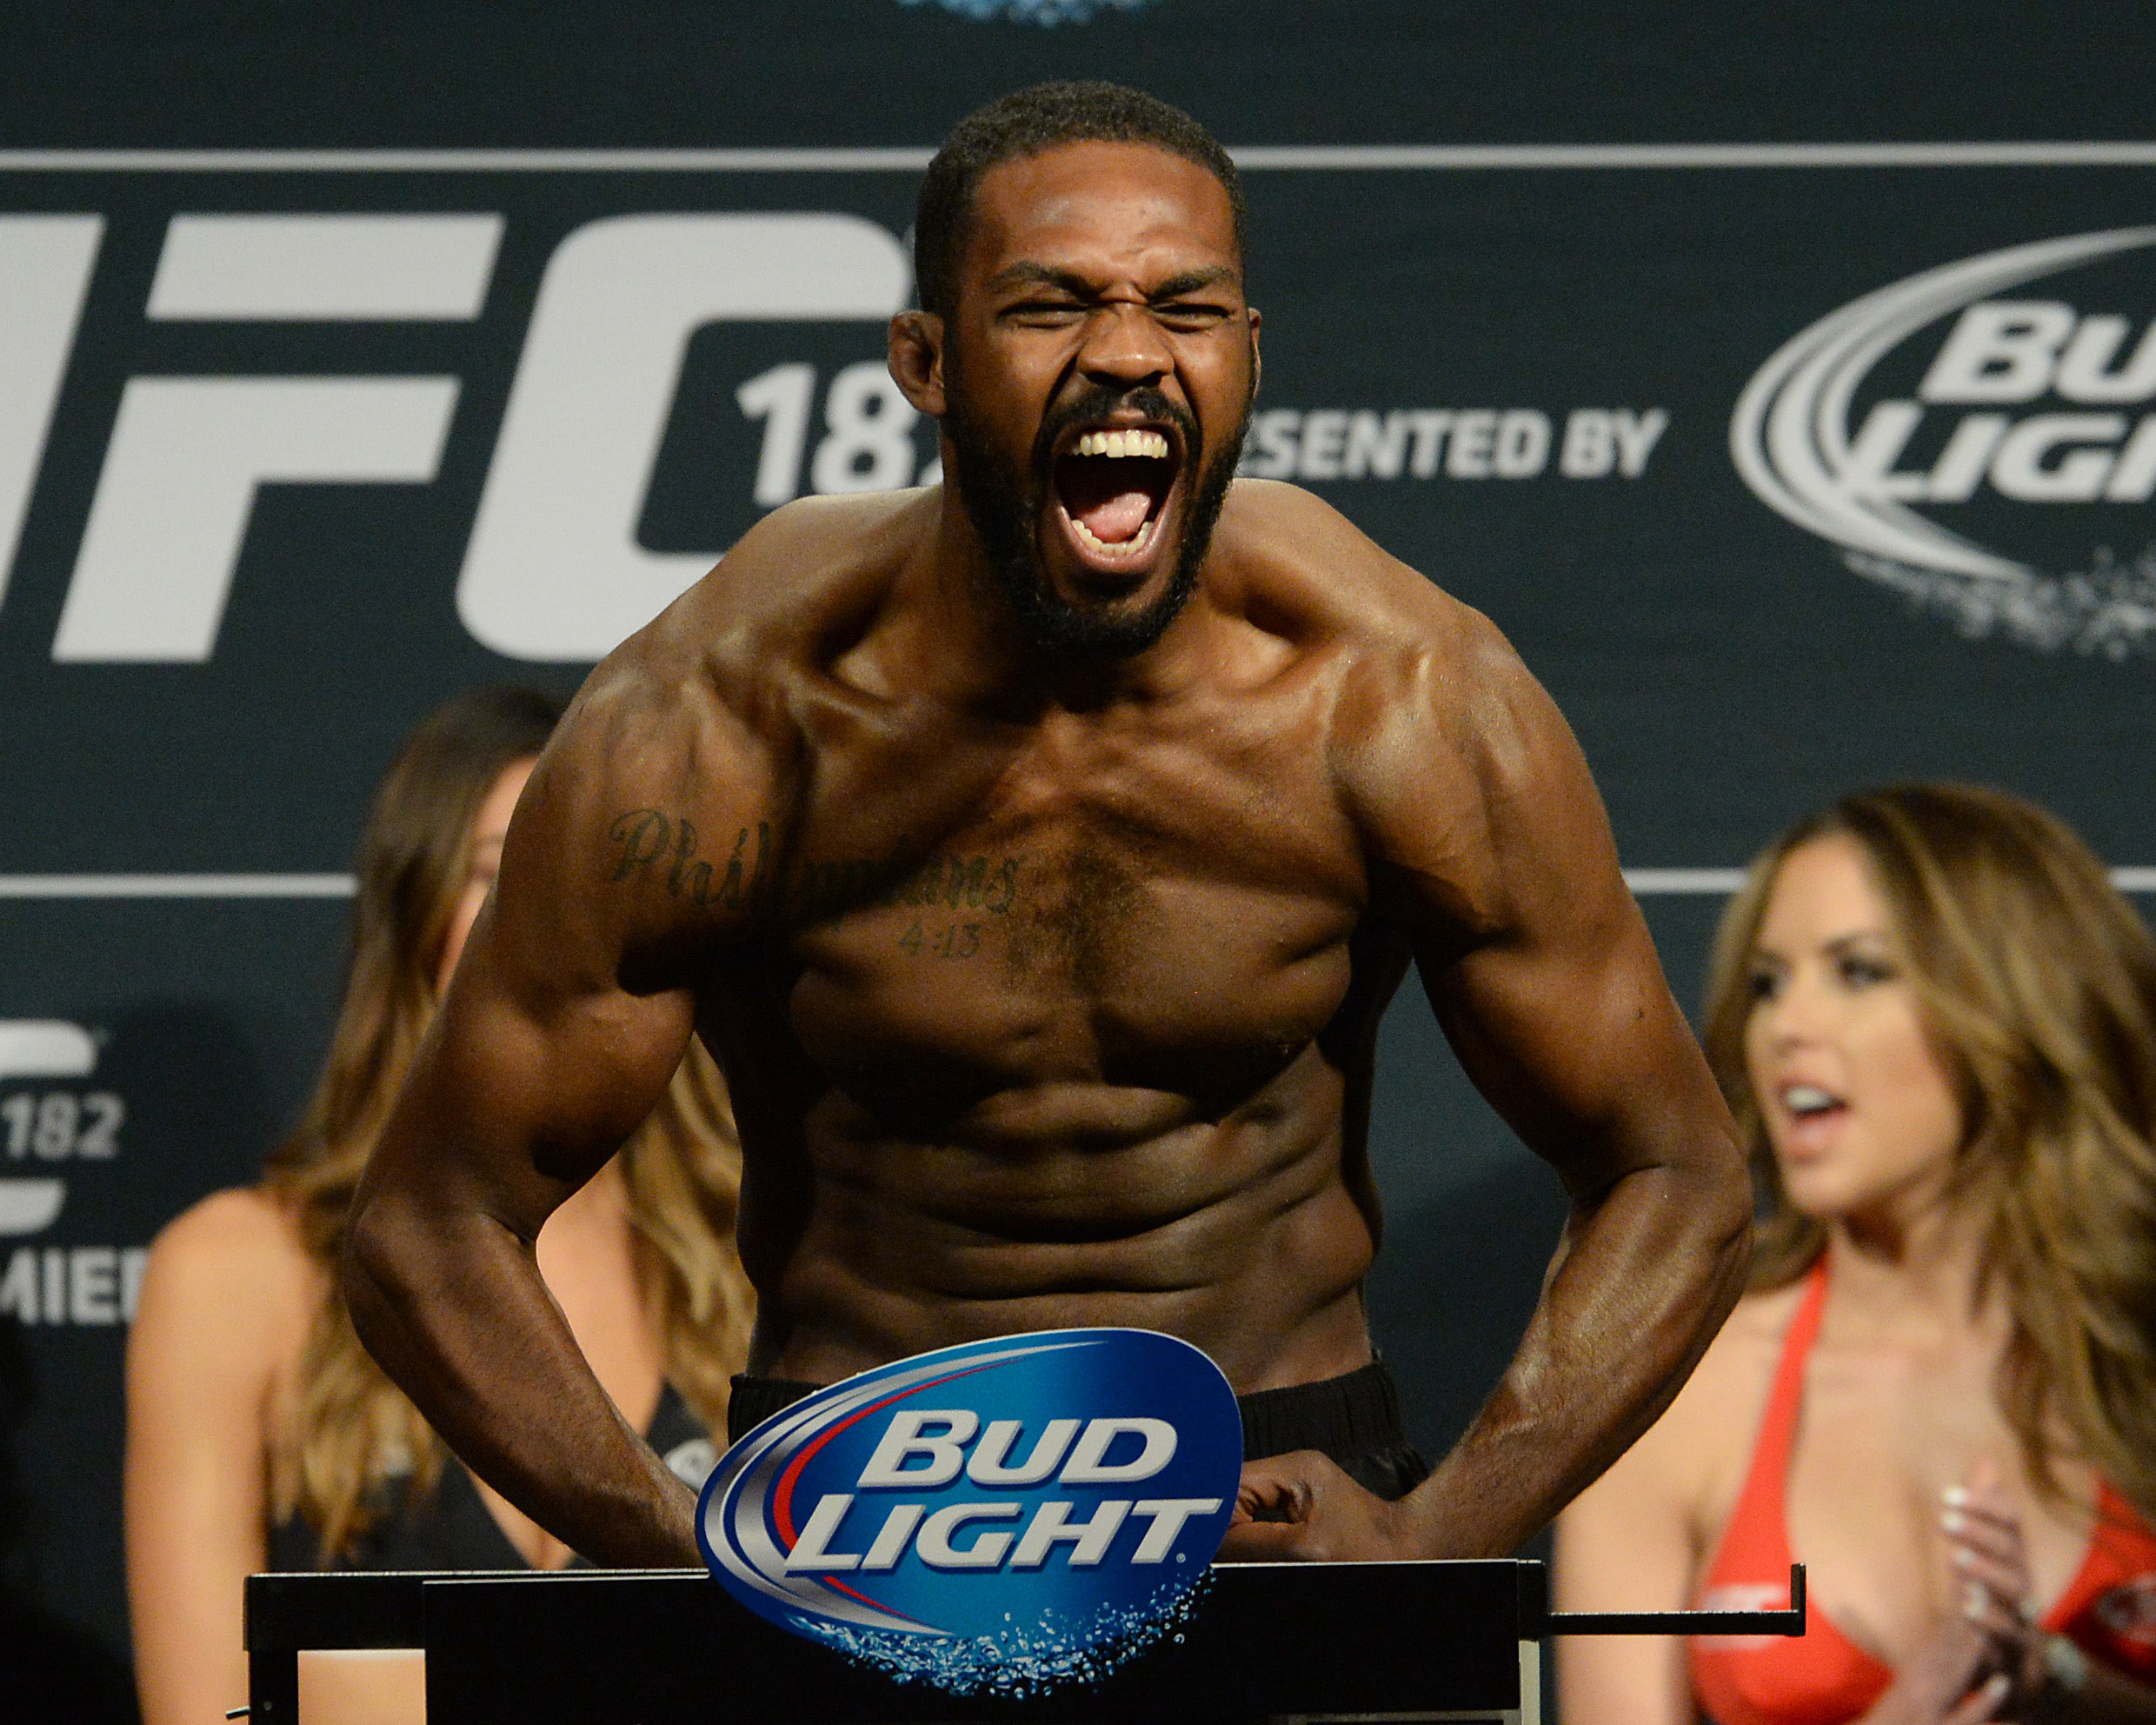 Jon Jones is serving an indefinite suspension from the UFC. (USAT)